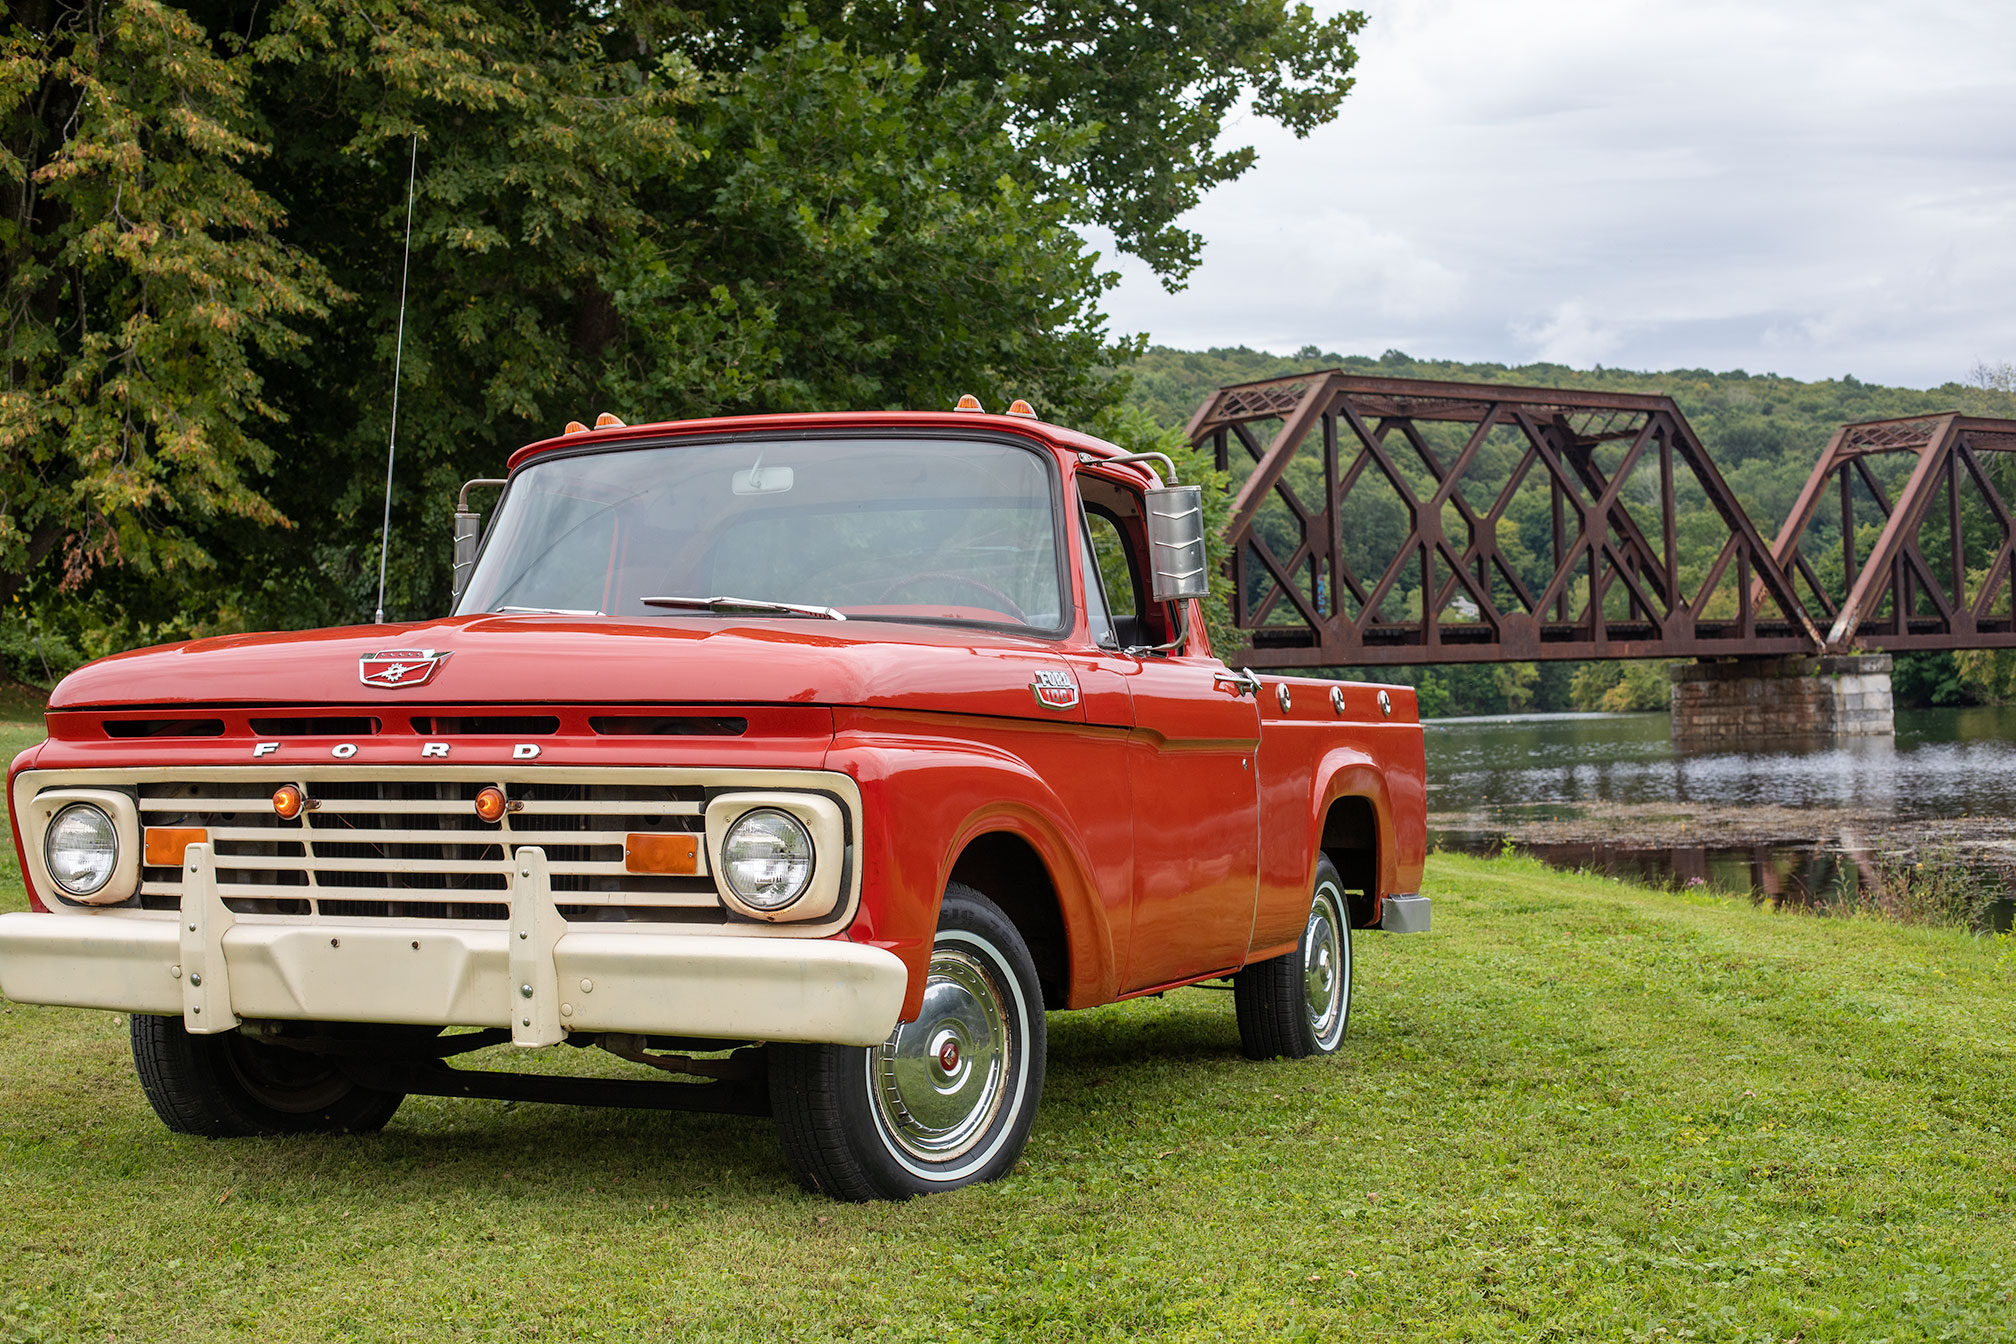 1963 Ford F-100 "Ole Red"